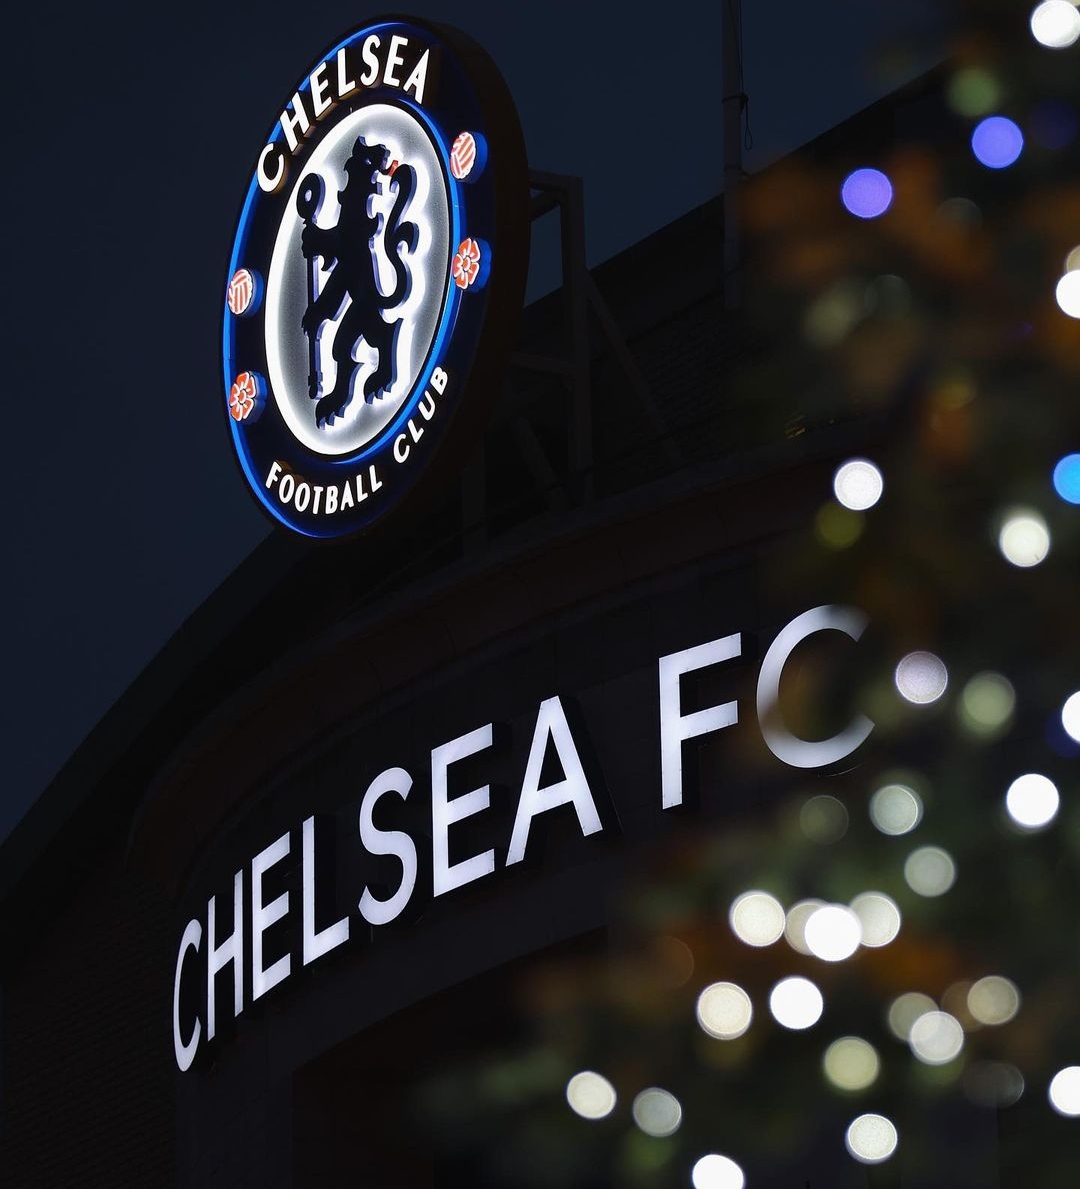 EPL: Possible reasons for Chelsea’s recent woes